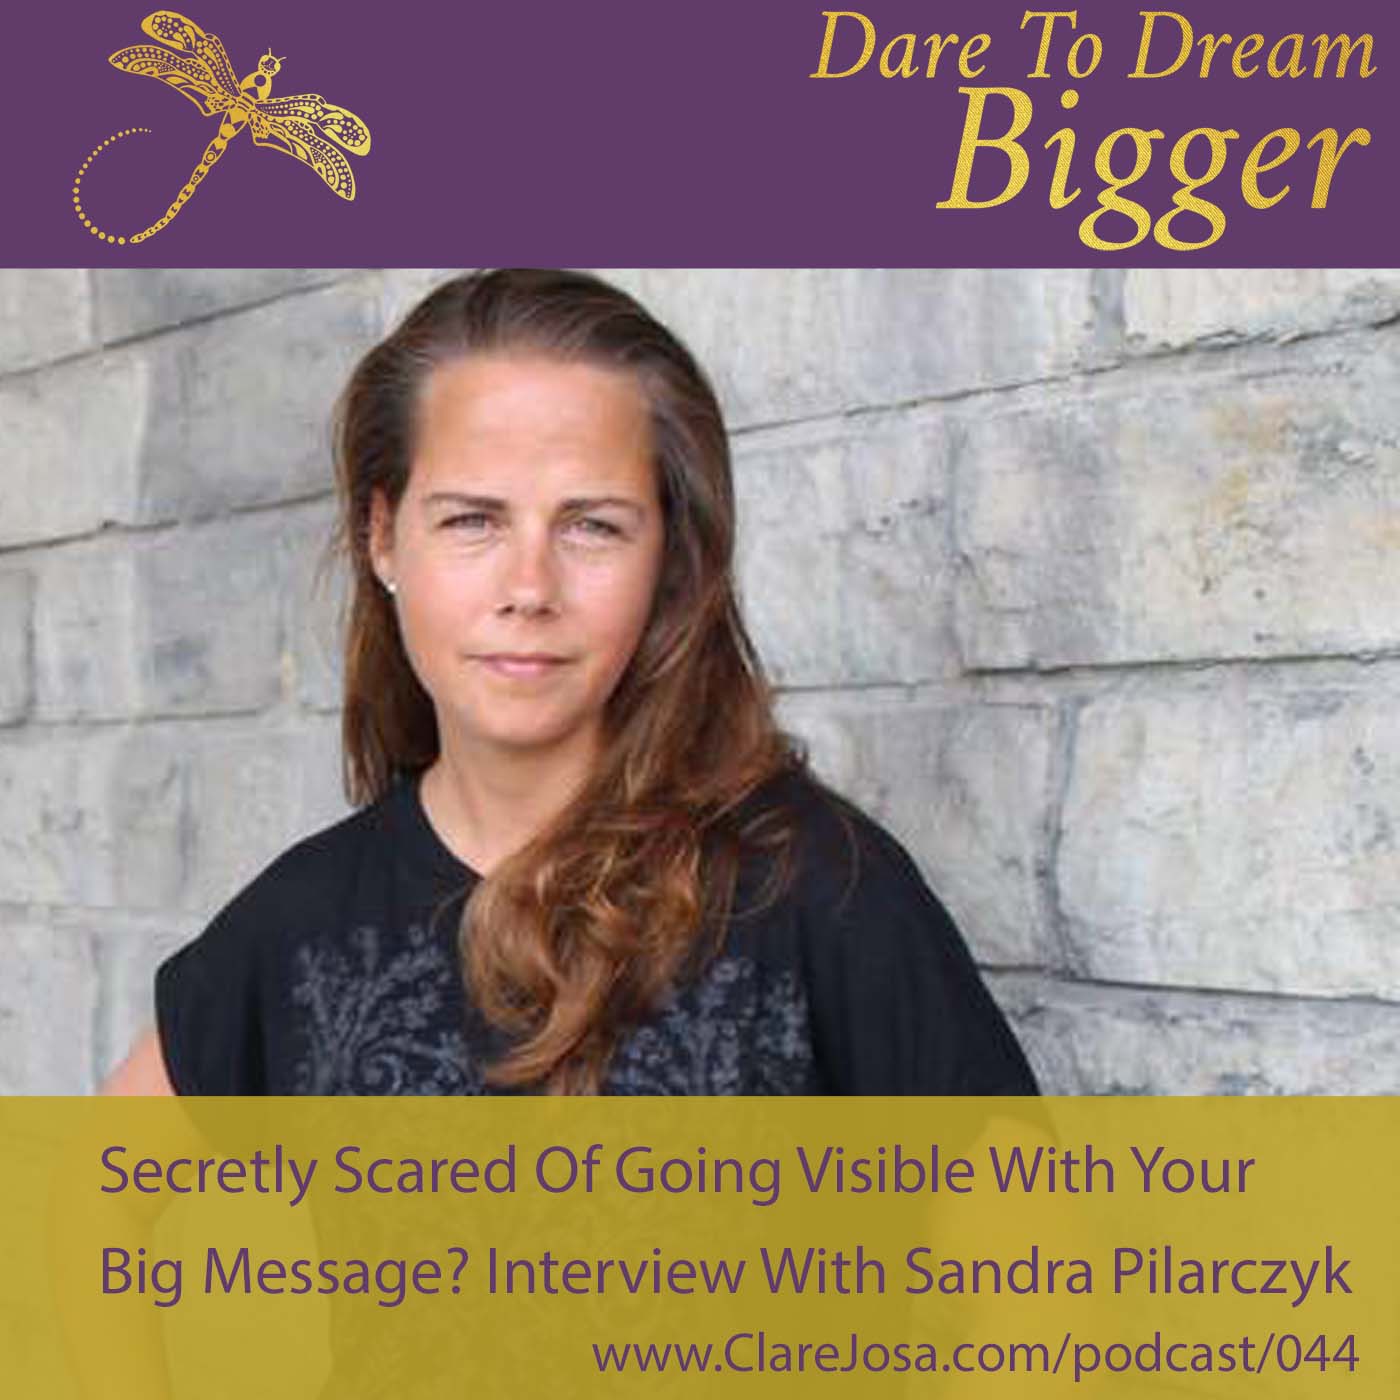 Secretly Scared Of Going Visible With Your Big Message? Interview With Sandra Pilarczyk [DTDB044] http://www.clarejosa.com/podcast/044/